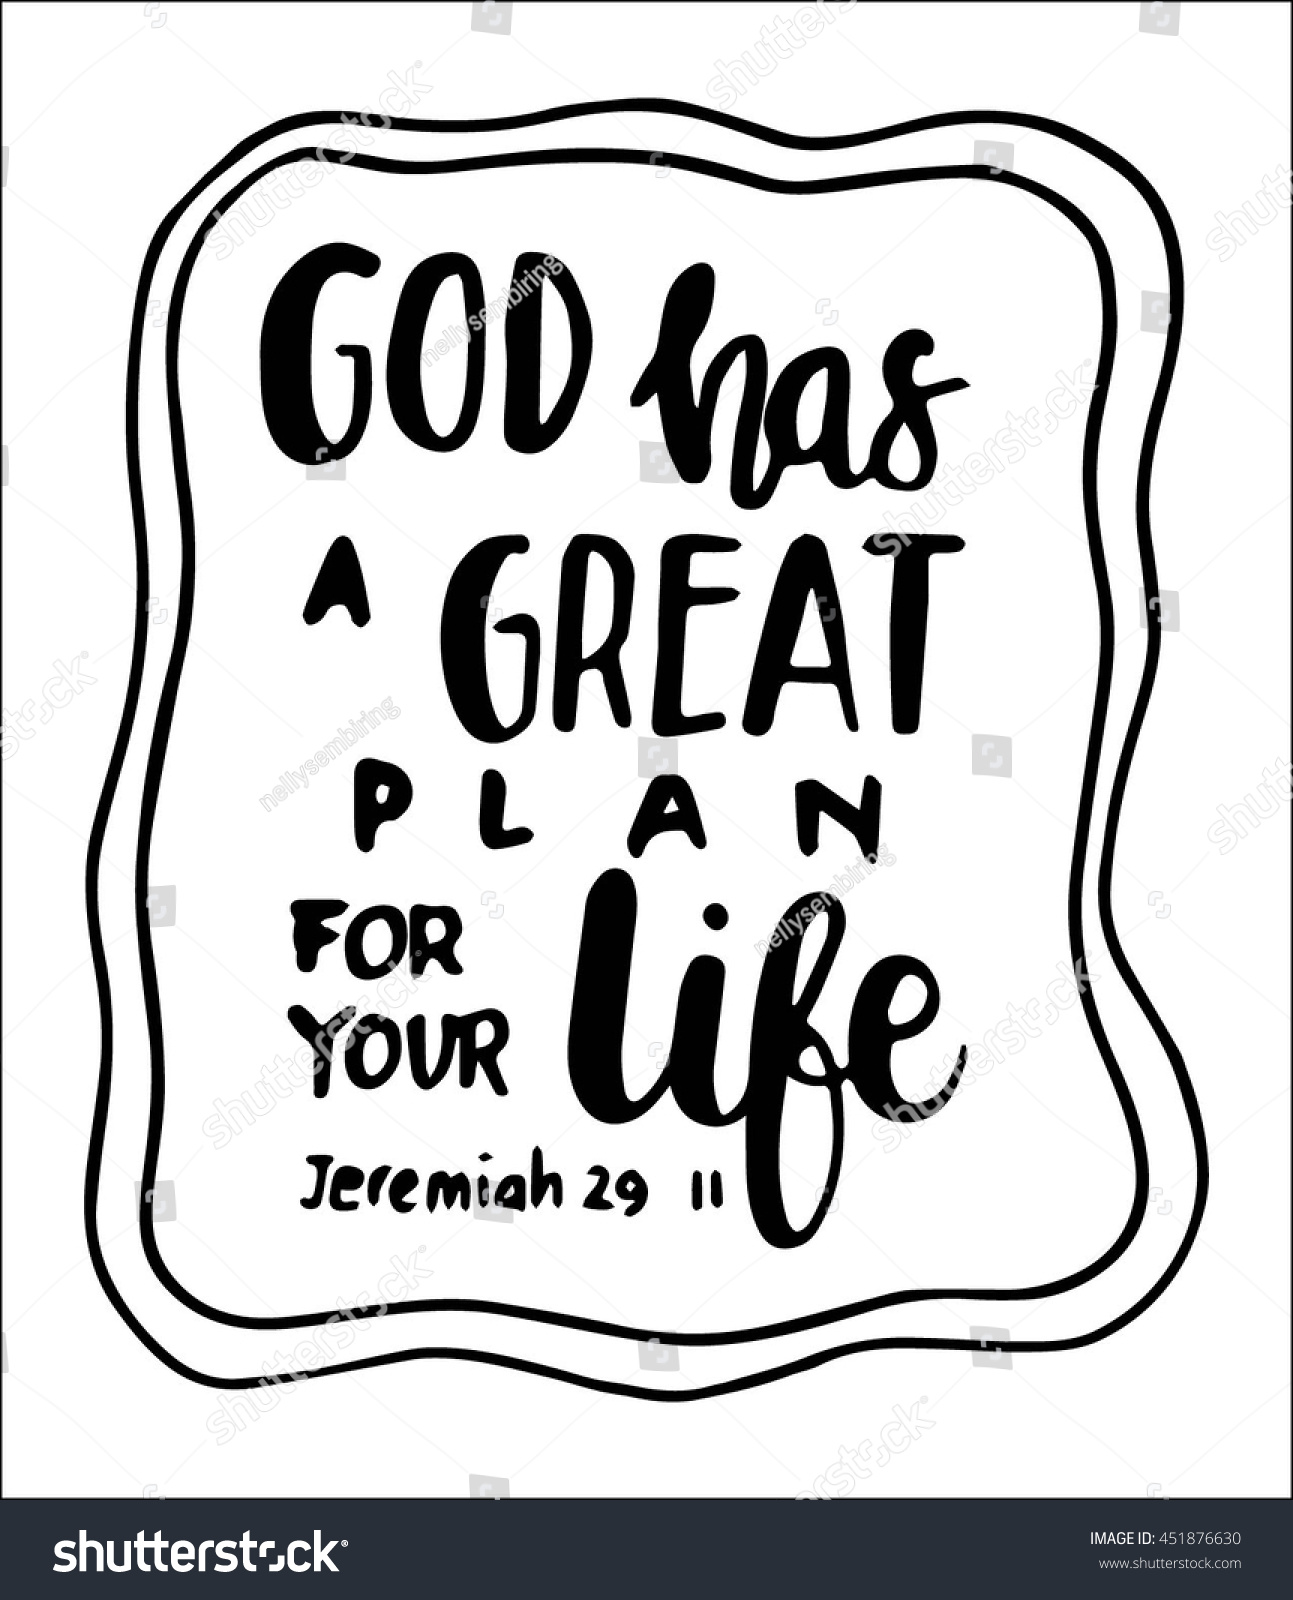 God has a great plan for your life quote on white background Hand drawn lettering